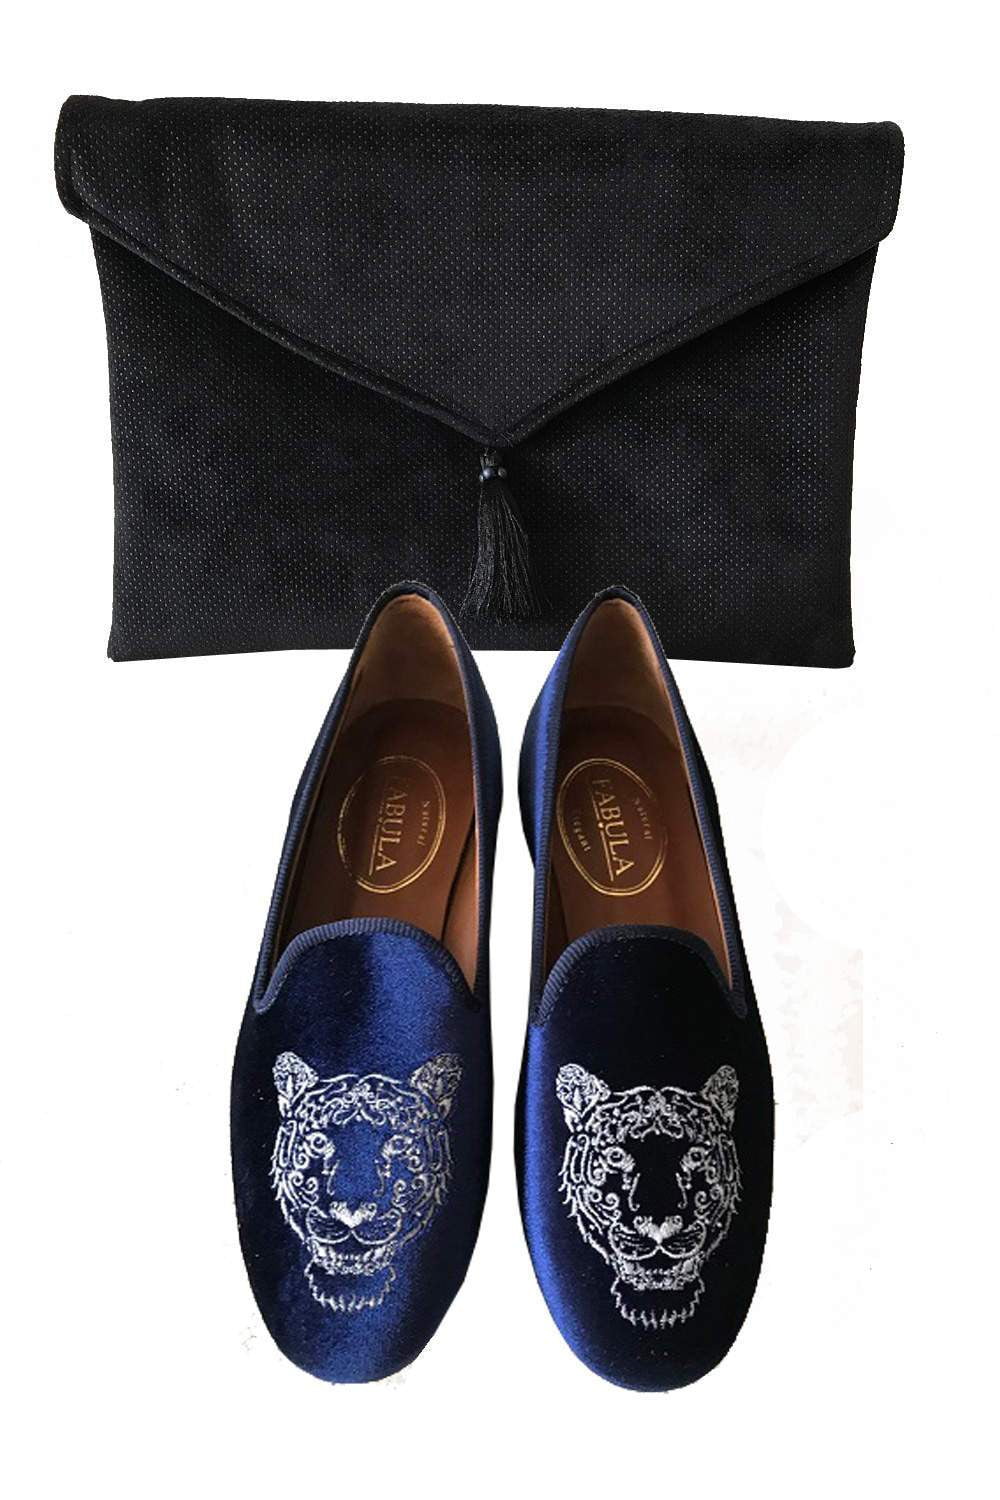 handmade navy slippers with a leon embroidery